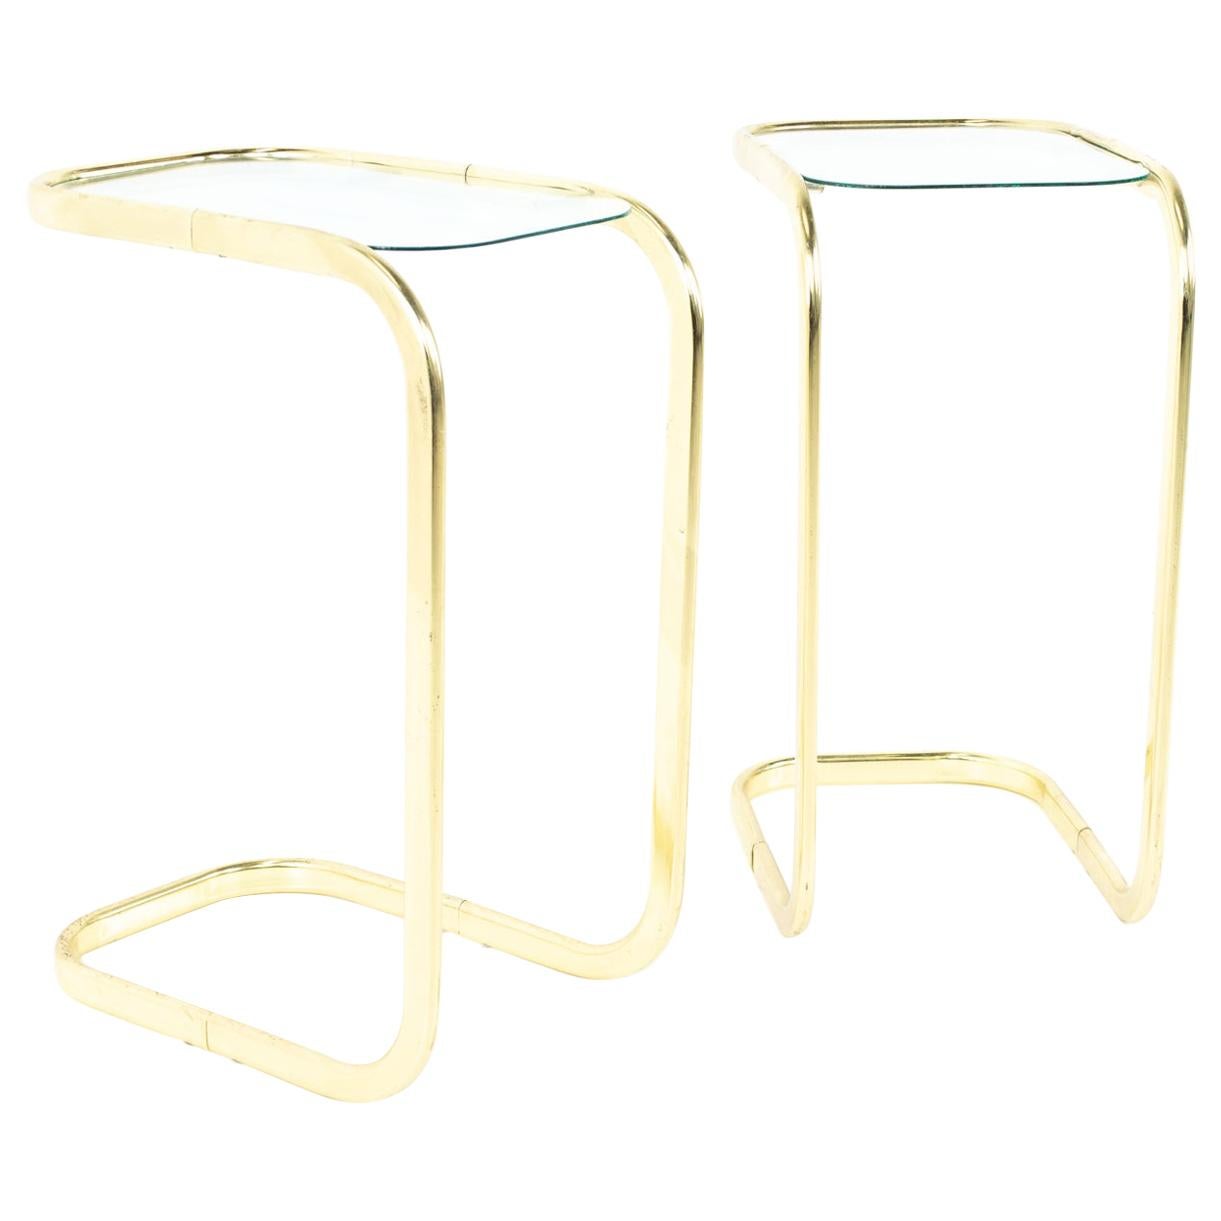 Milo Baughman Style Brass and Glass Cantilever Side End Tables, Pair